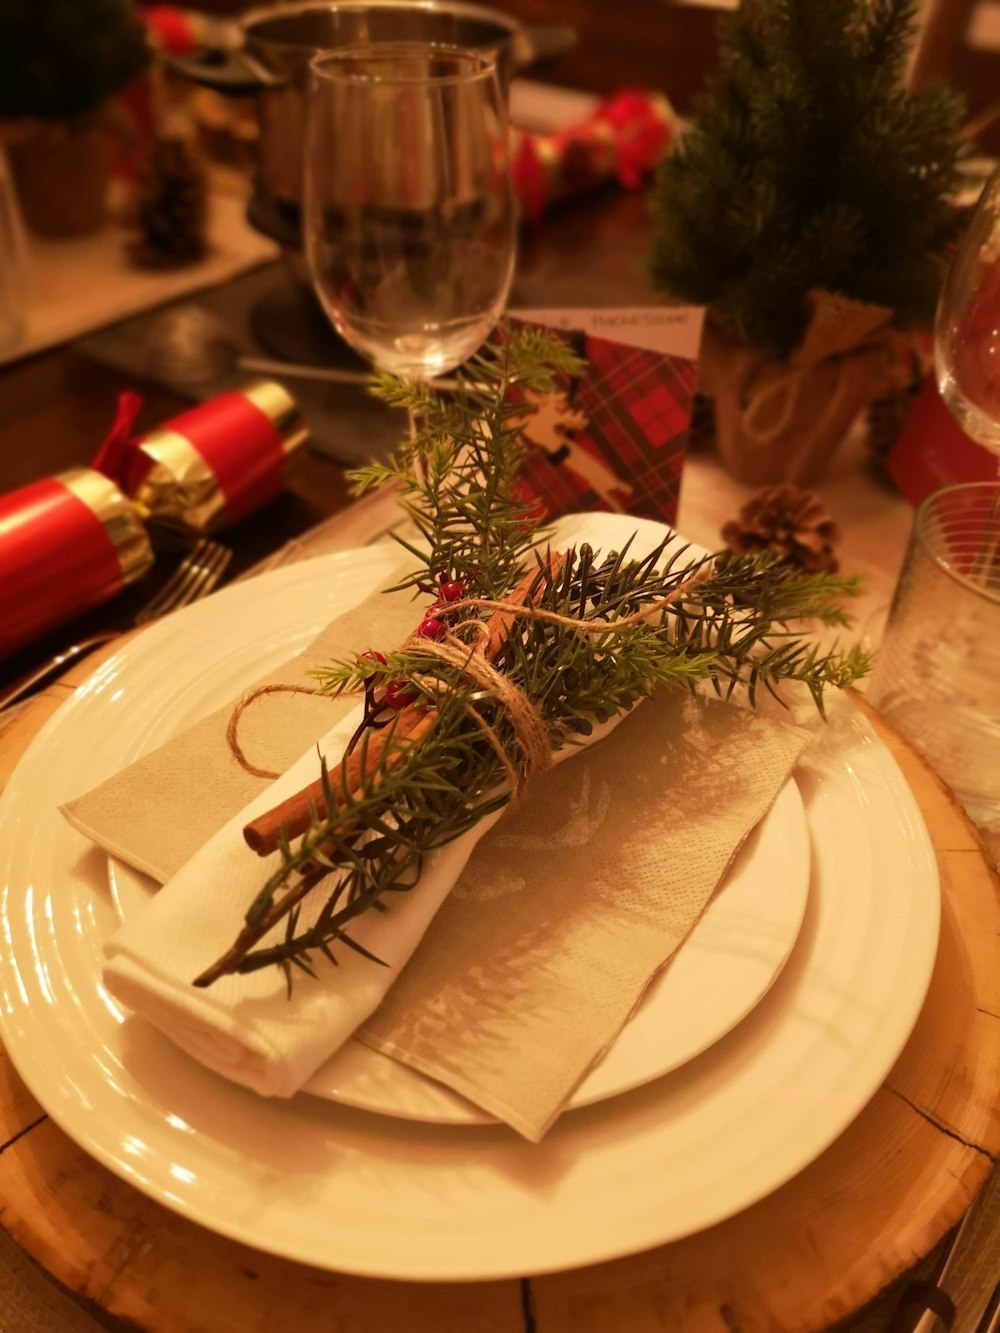 a place setting with napkins and napkins on a plate